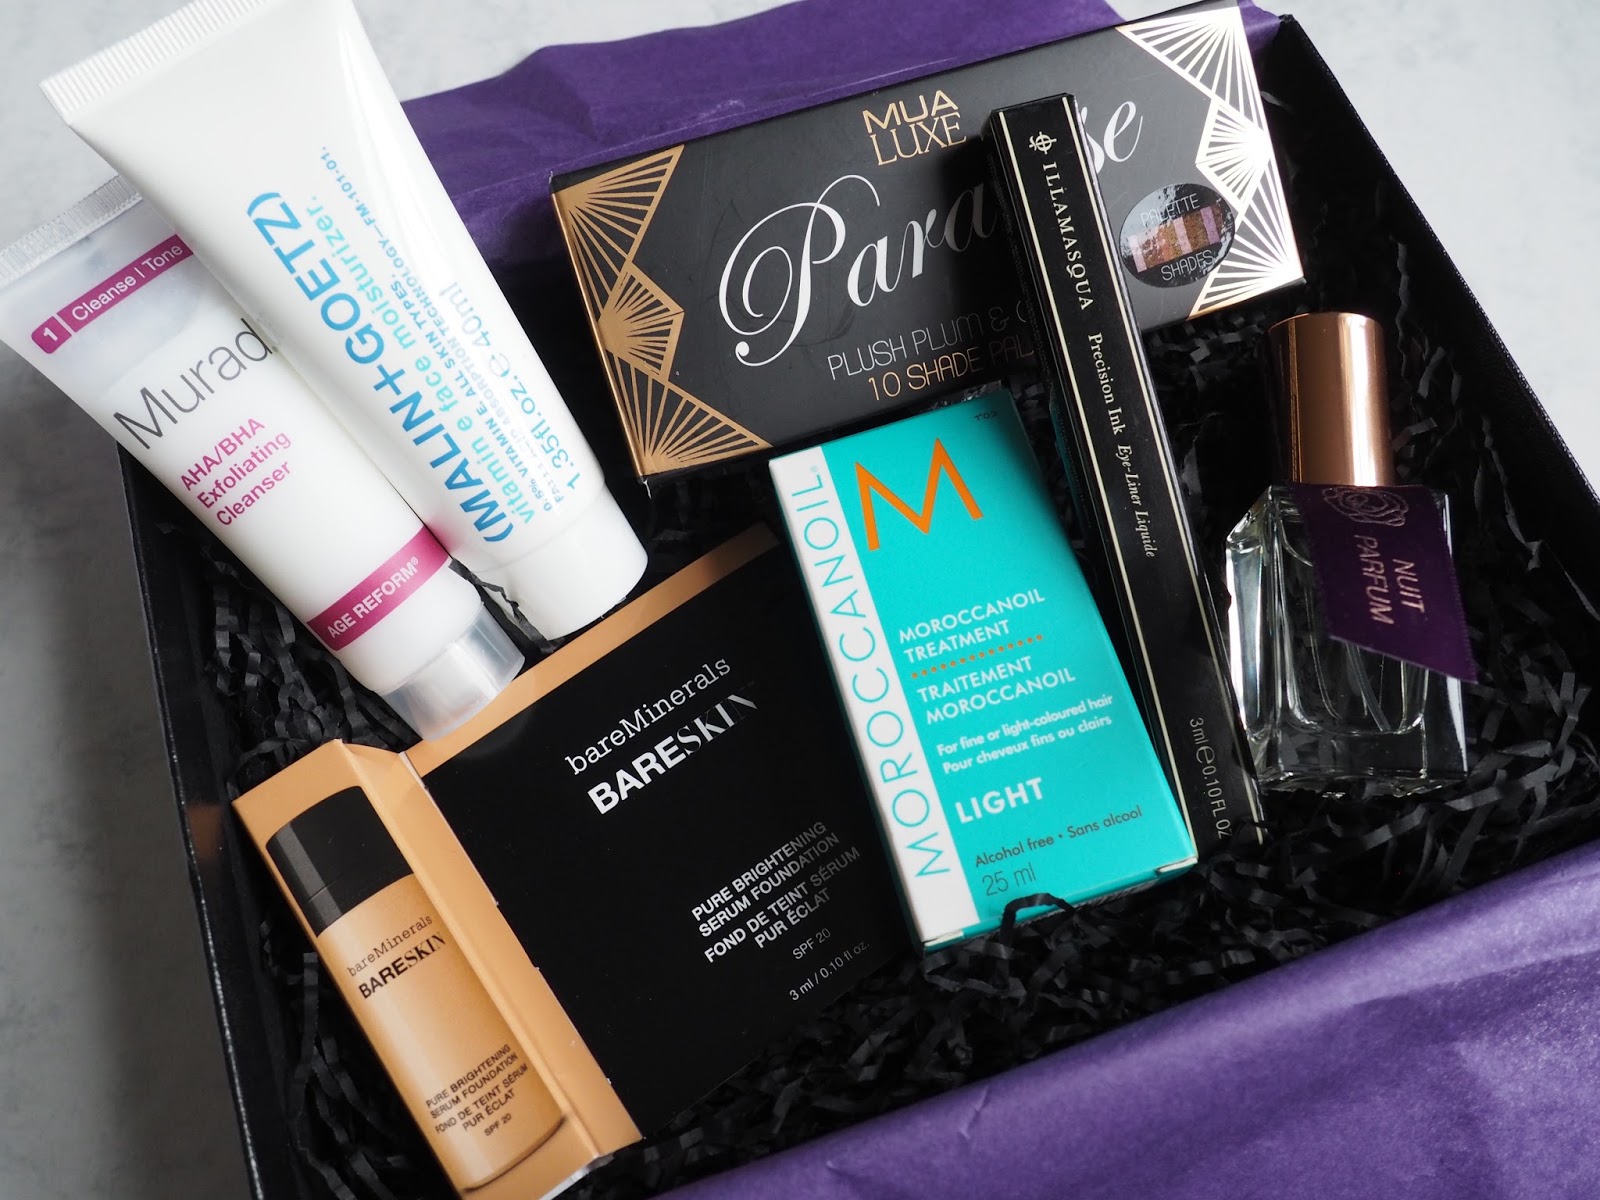 Glamour Spring edit beauty box review Latest in Beauty 